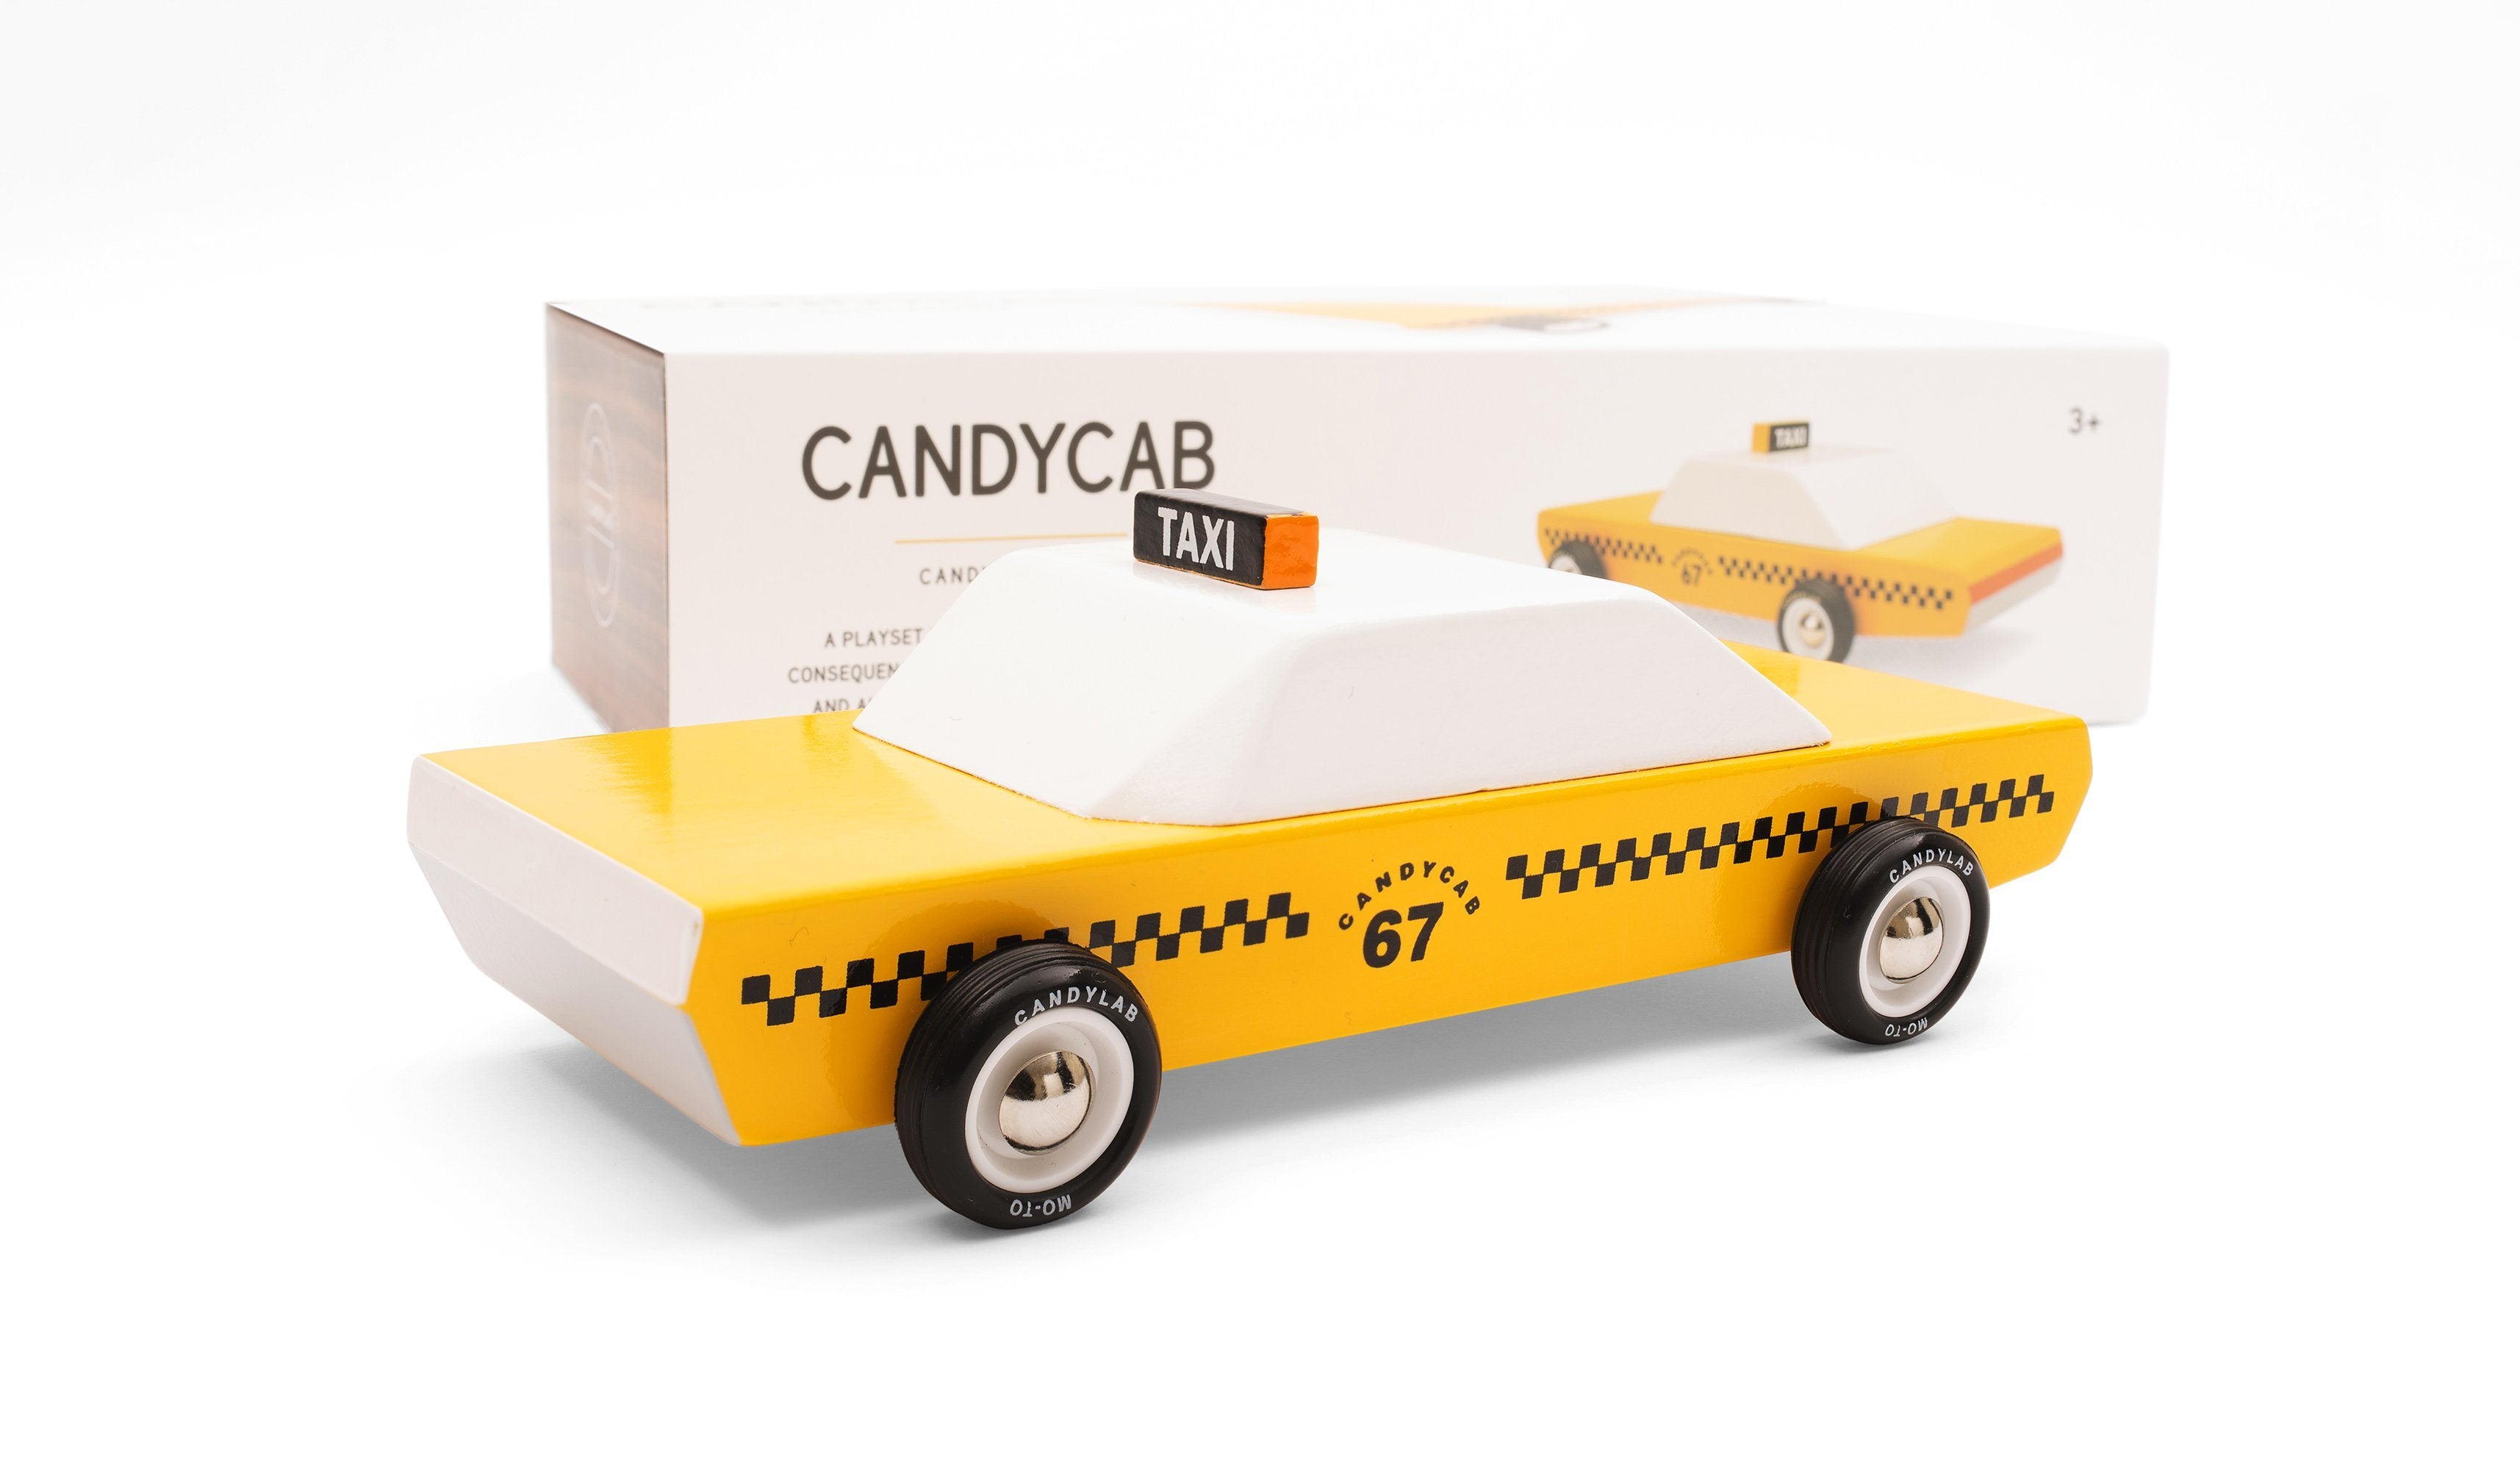 Candylab - Speelgoedauto hout - Candycab taxi